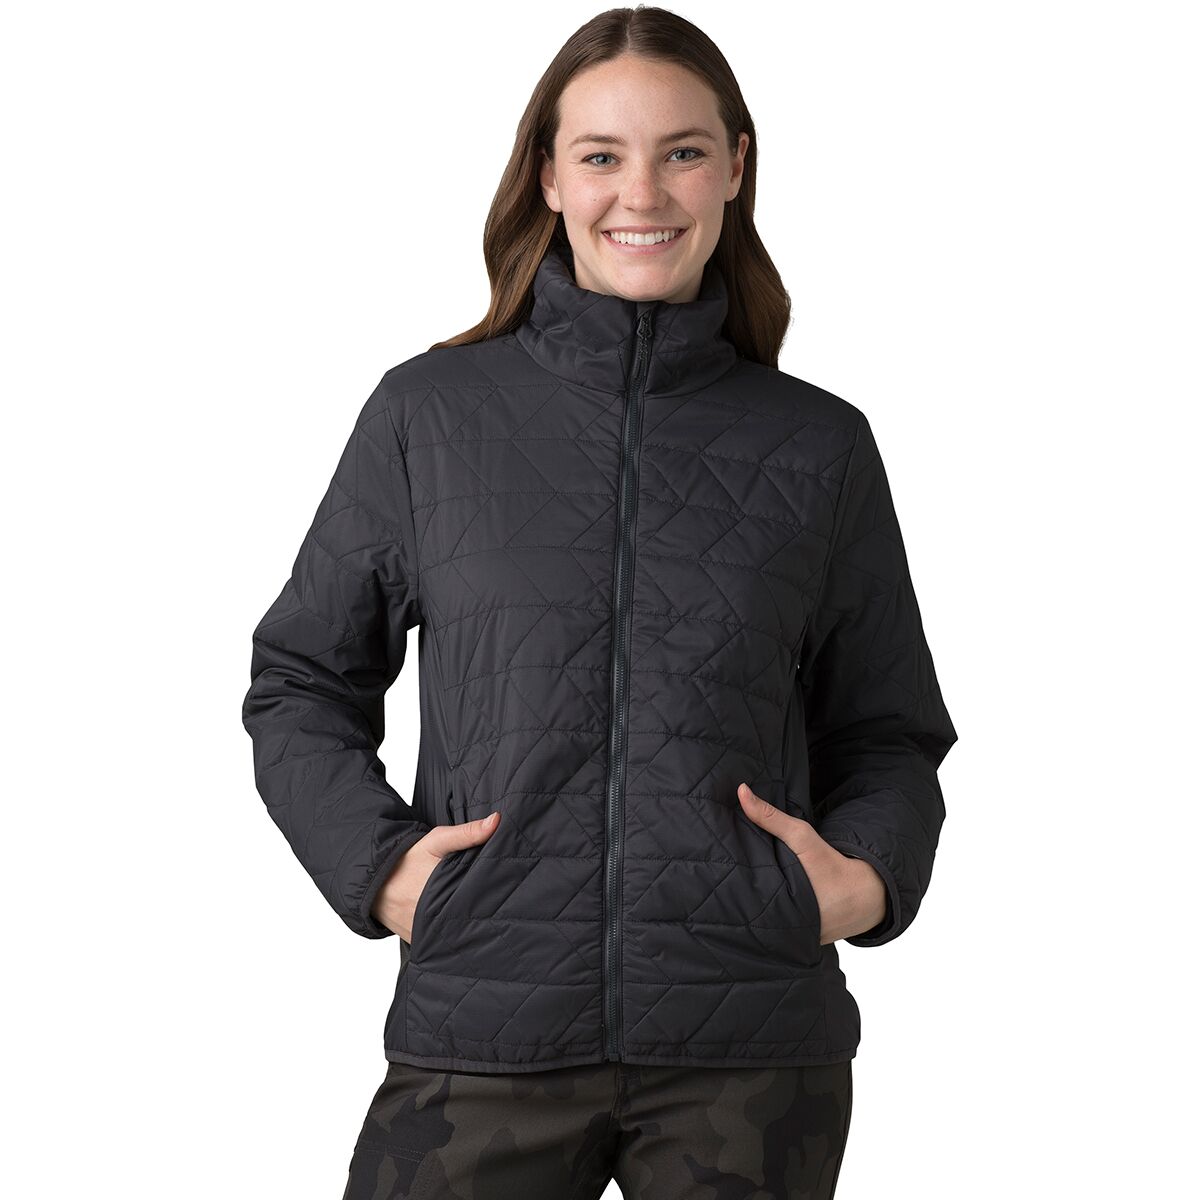 Prana - Women's Classic Casual Styles . Sustainable fashion and apparel.